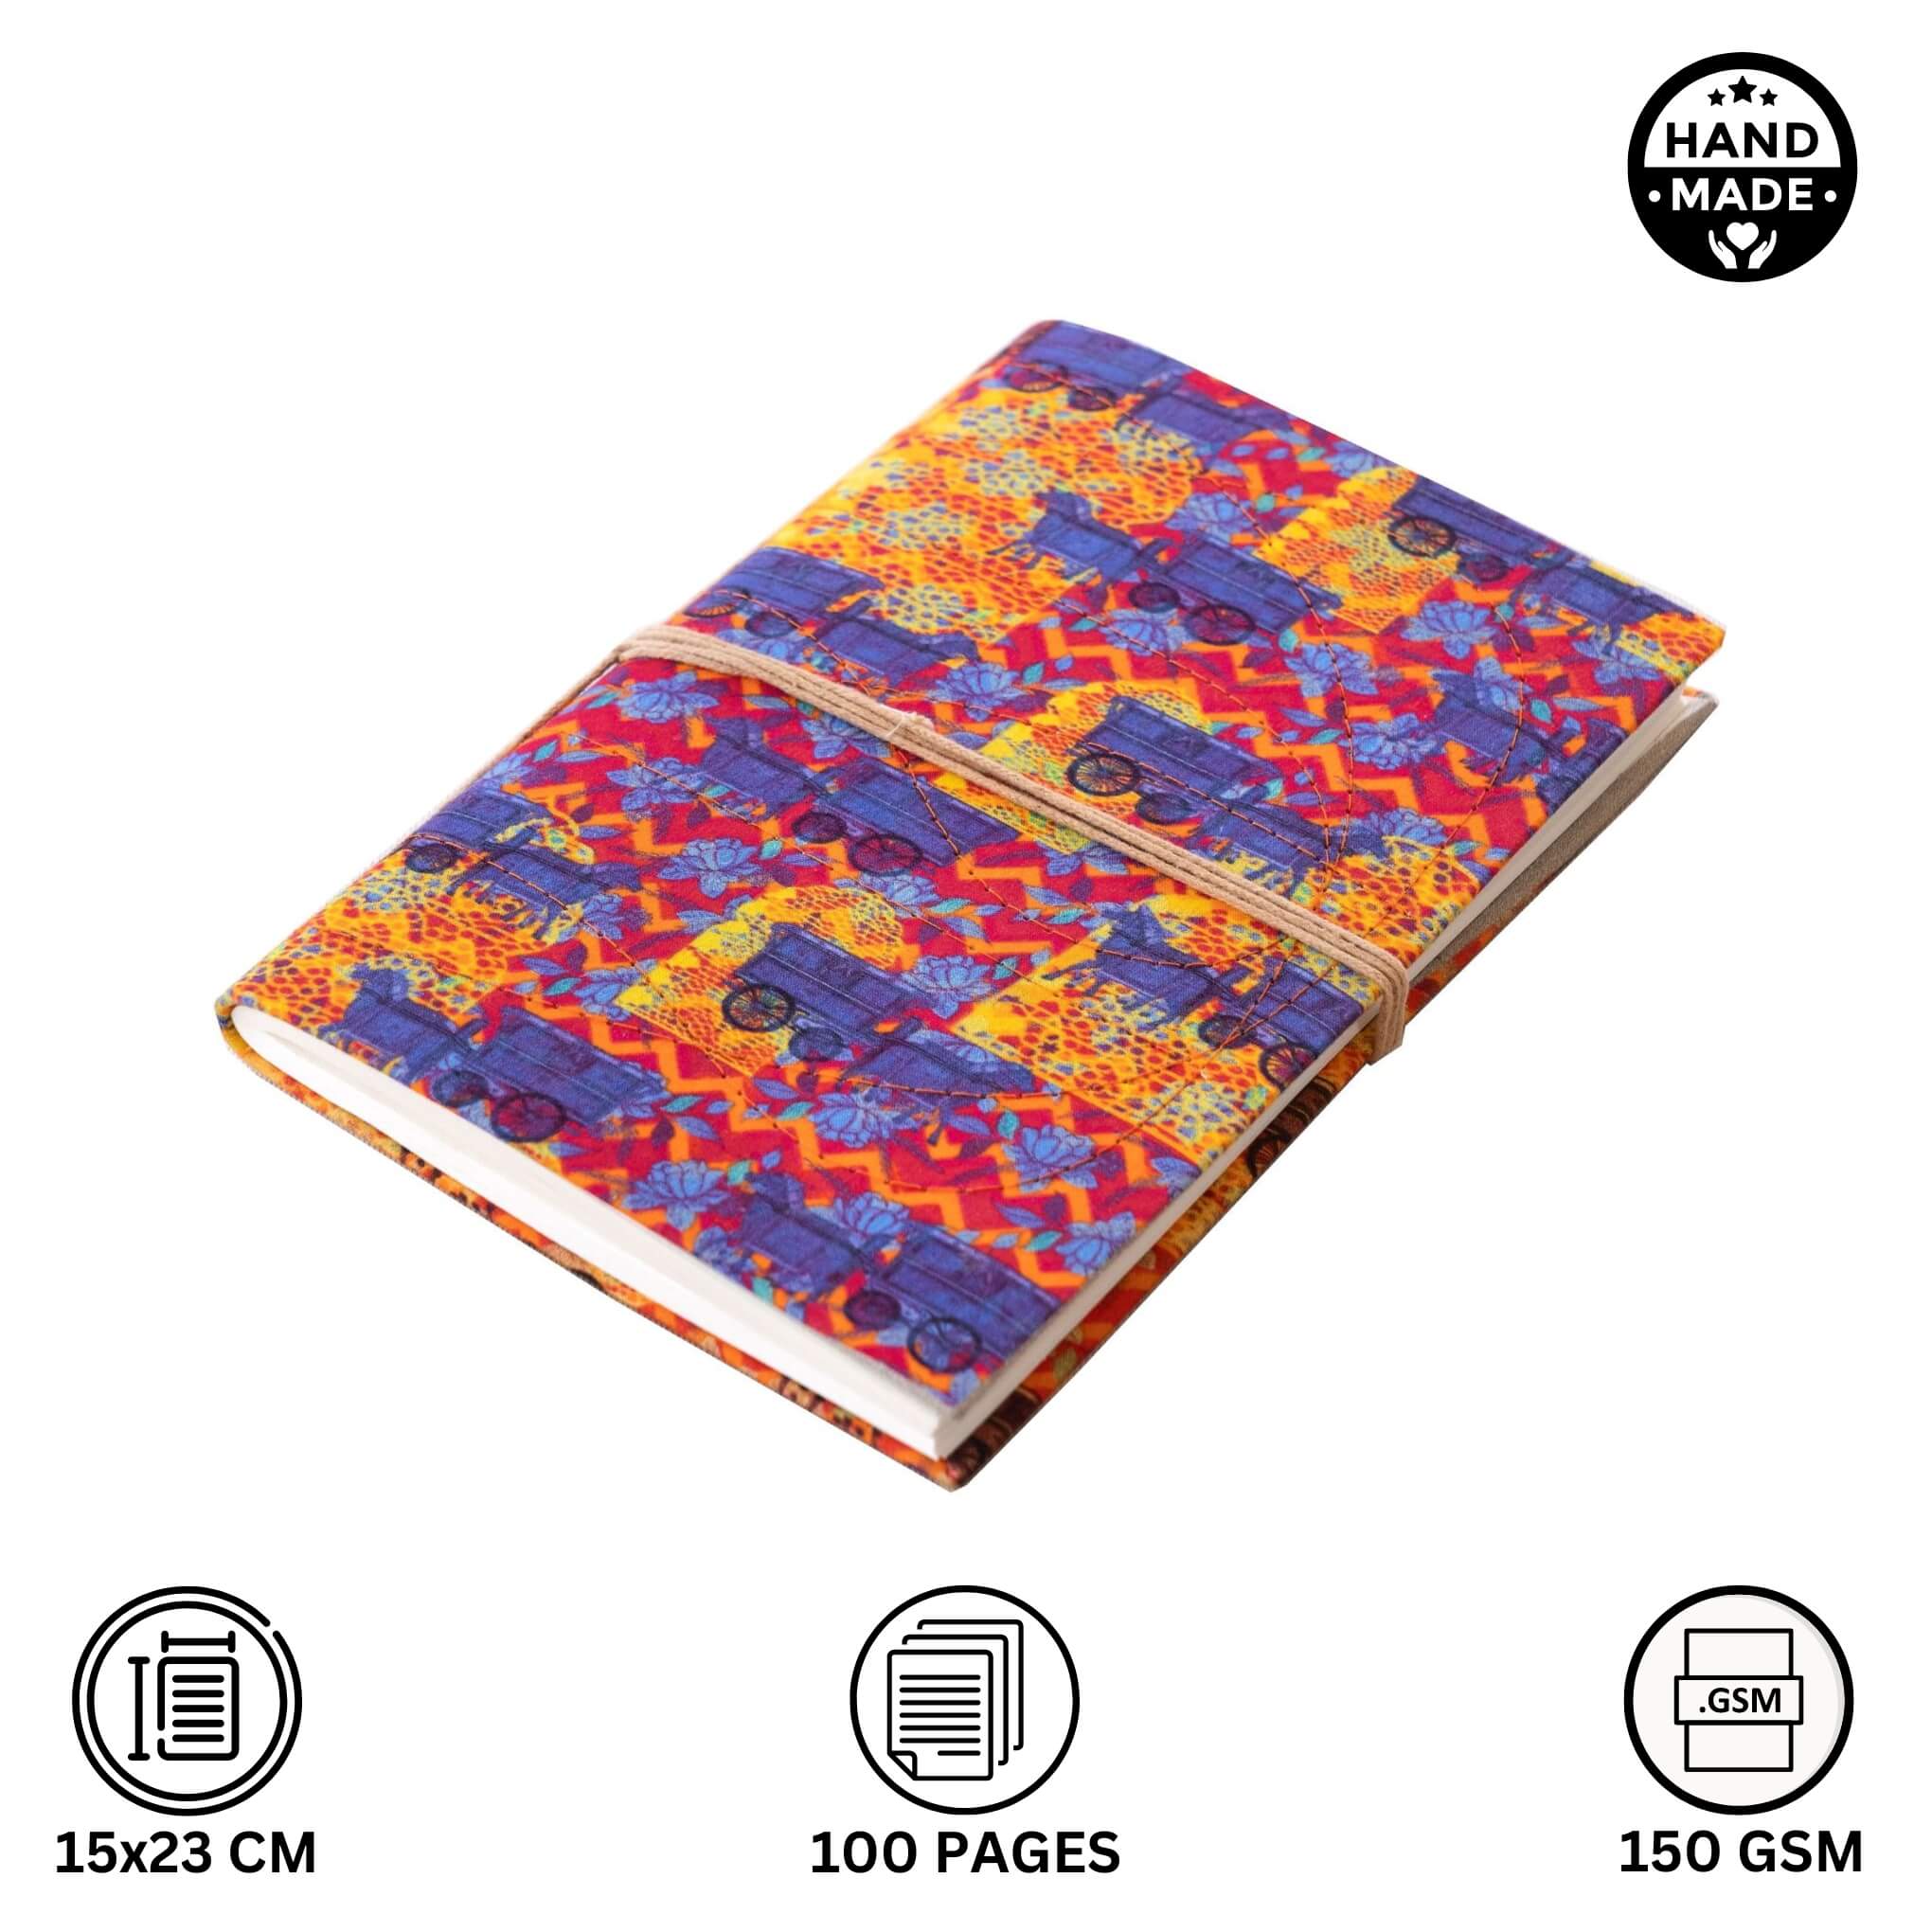 Handmade paper diary with cotton fabric cover, Making, Uses